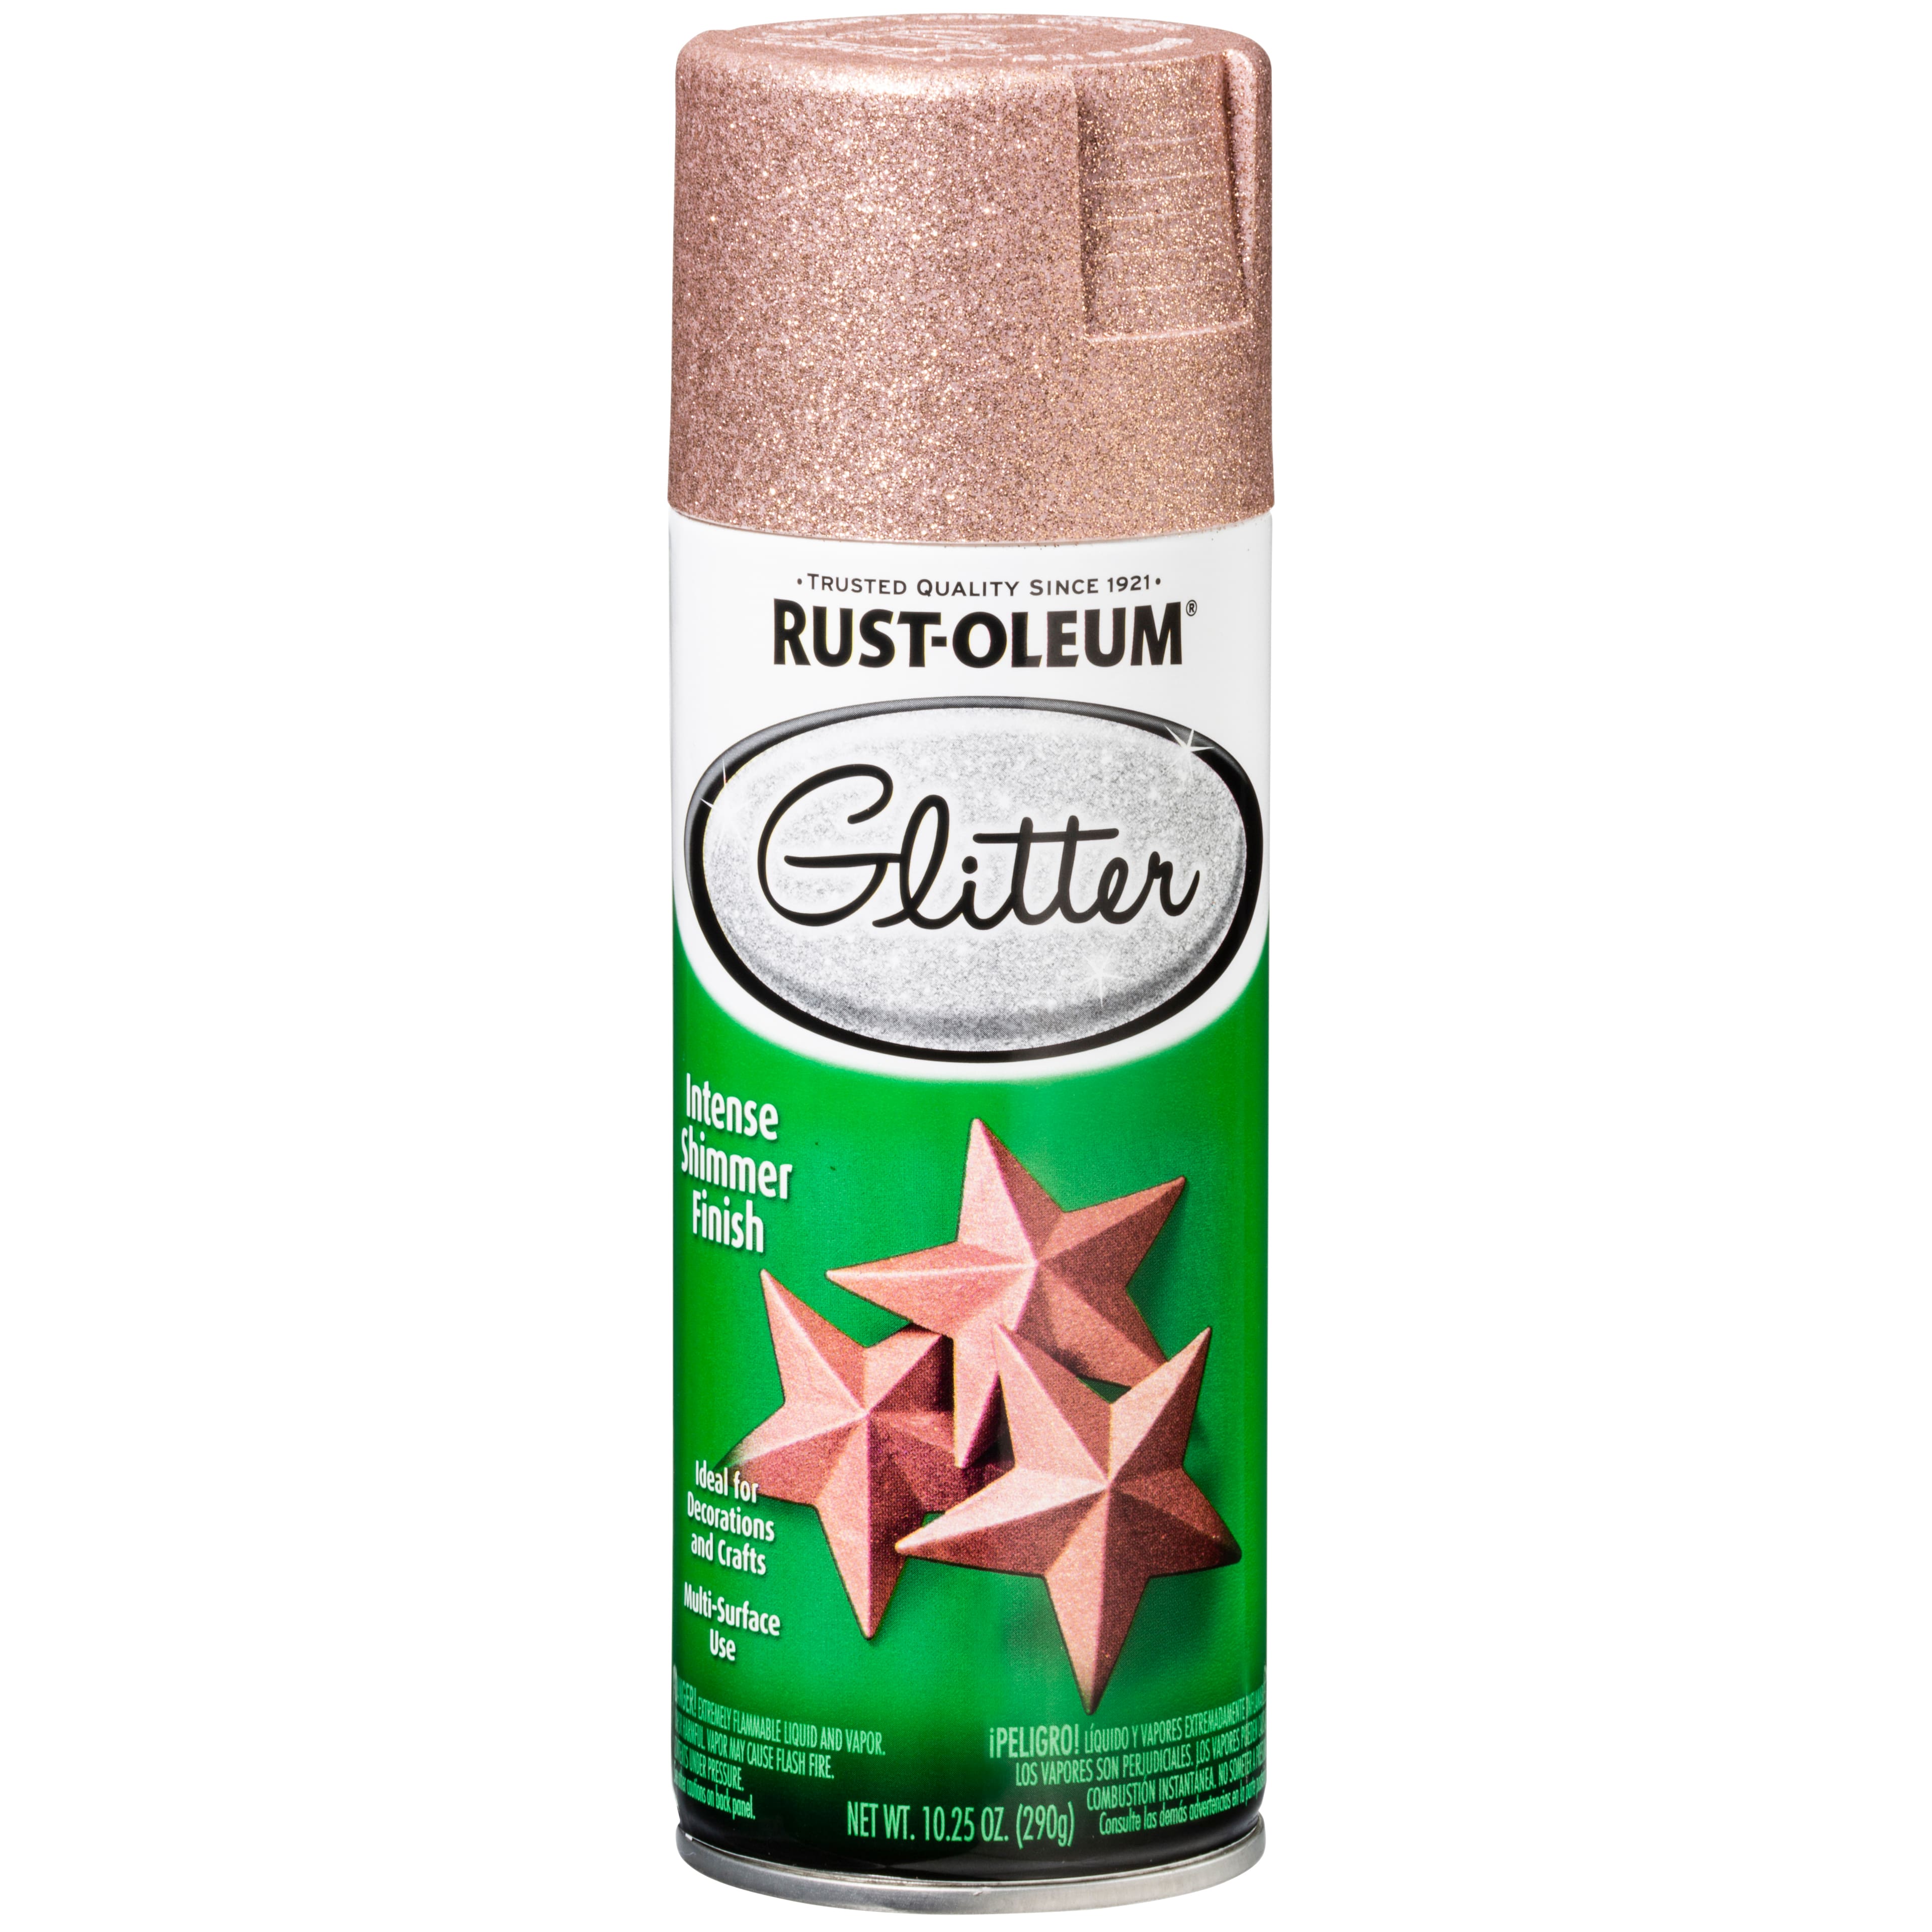 Rose Gold, Rust-Oleum Specialty Glitter Interior Wall Paint, Quart -2 Pack